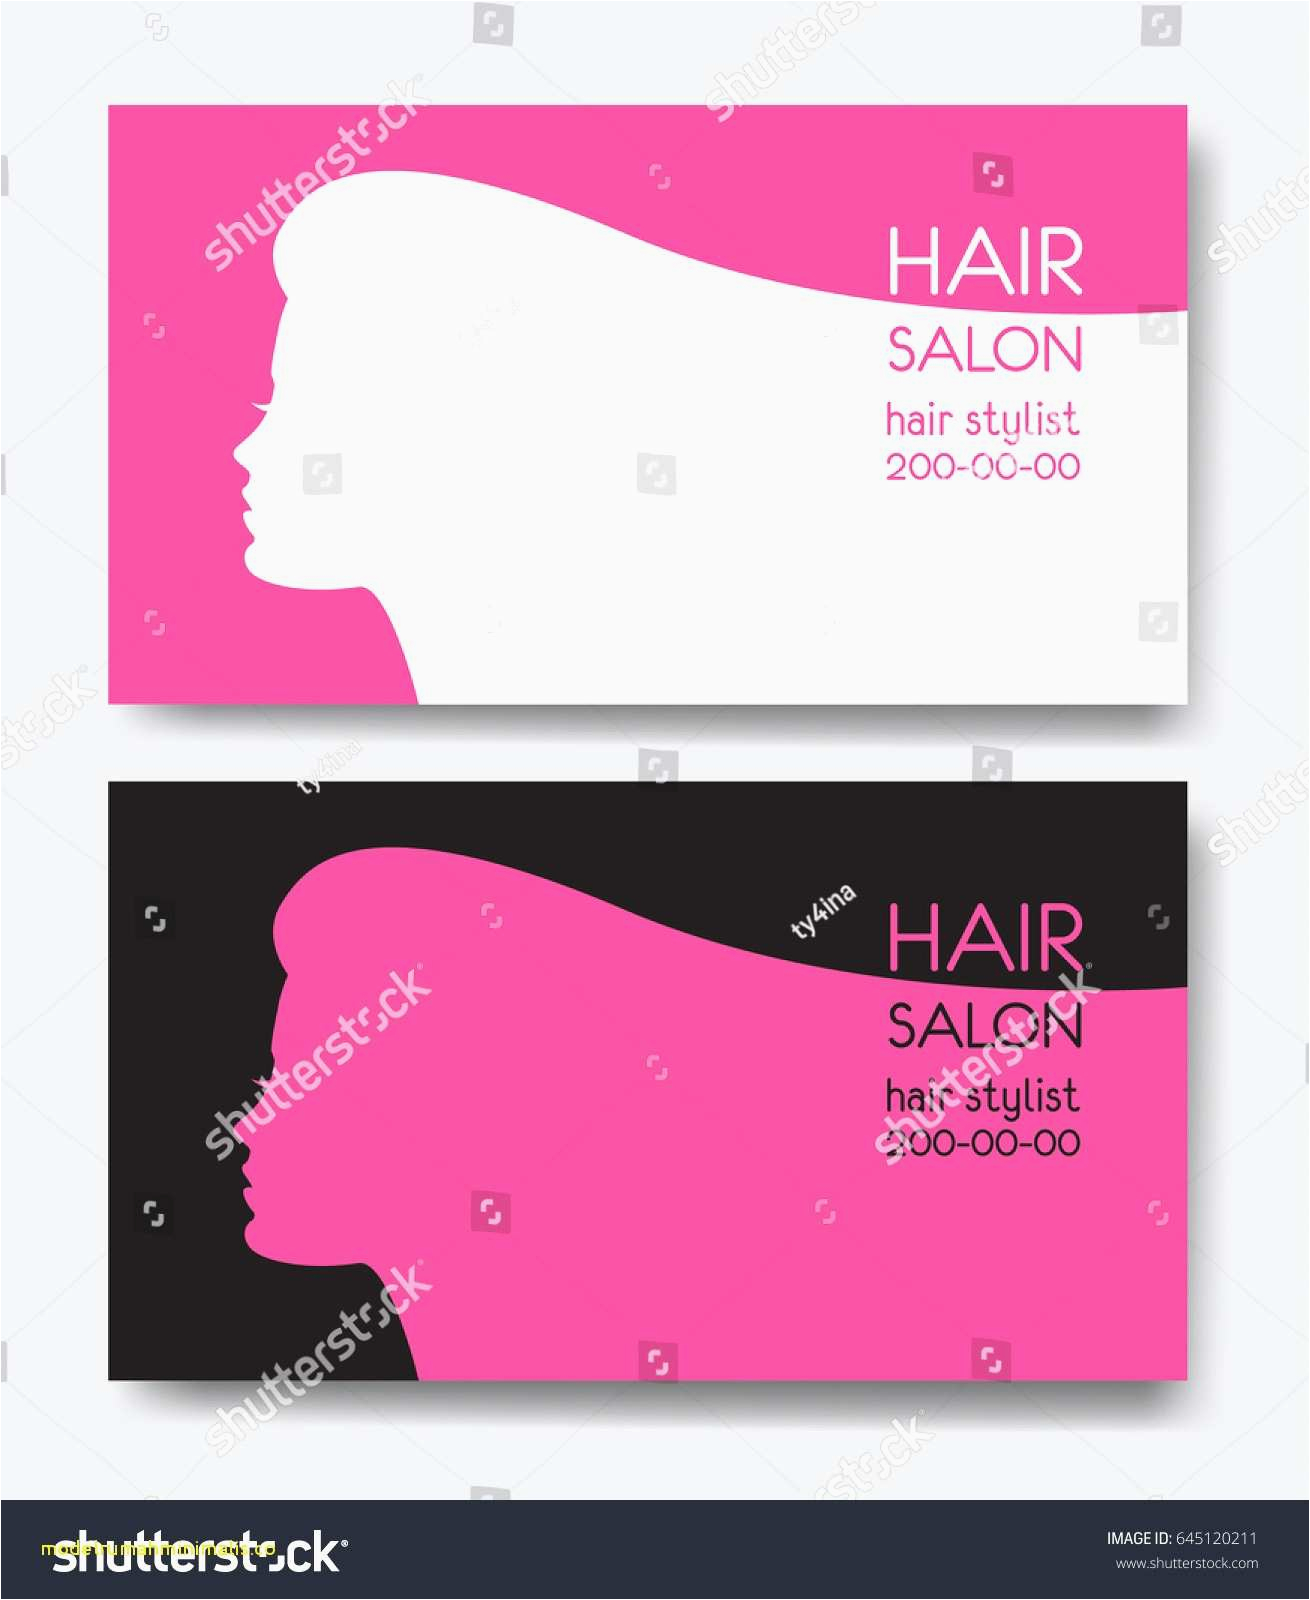 salon business cards templates free elegant top result hair business cards best amazing hair stylist business